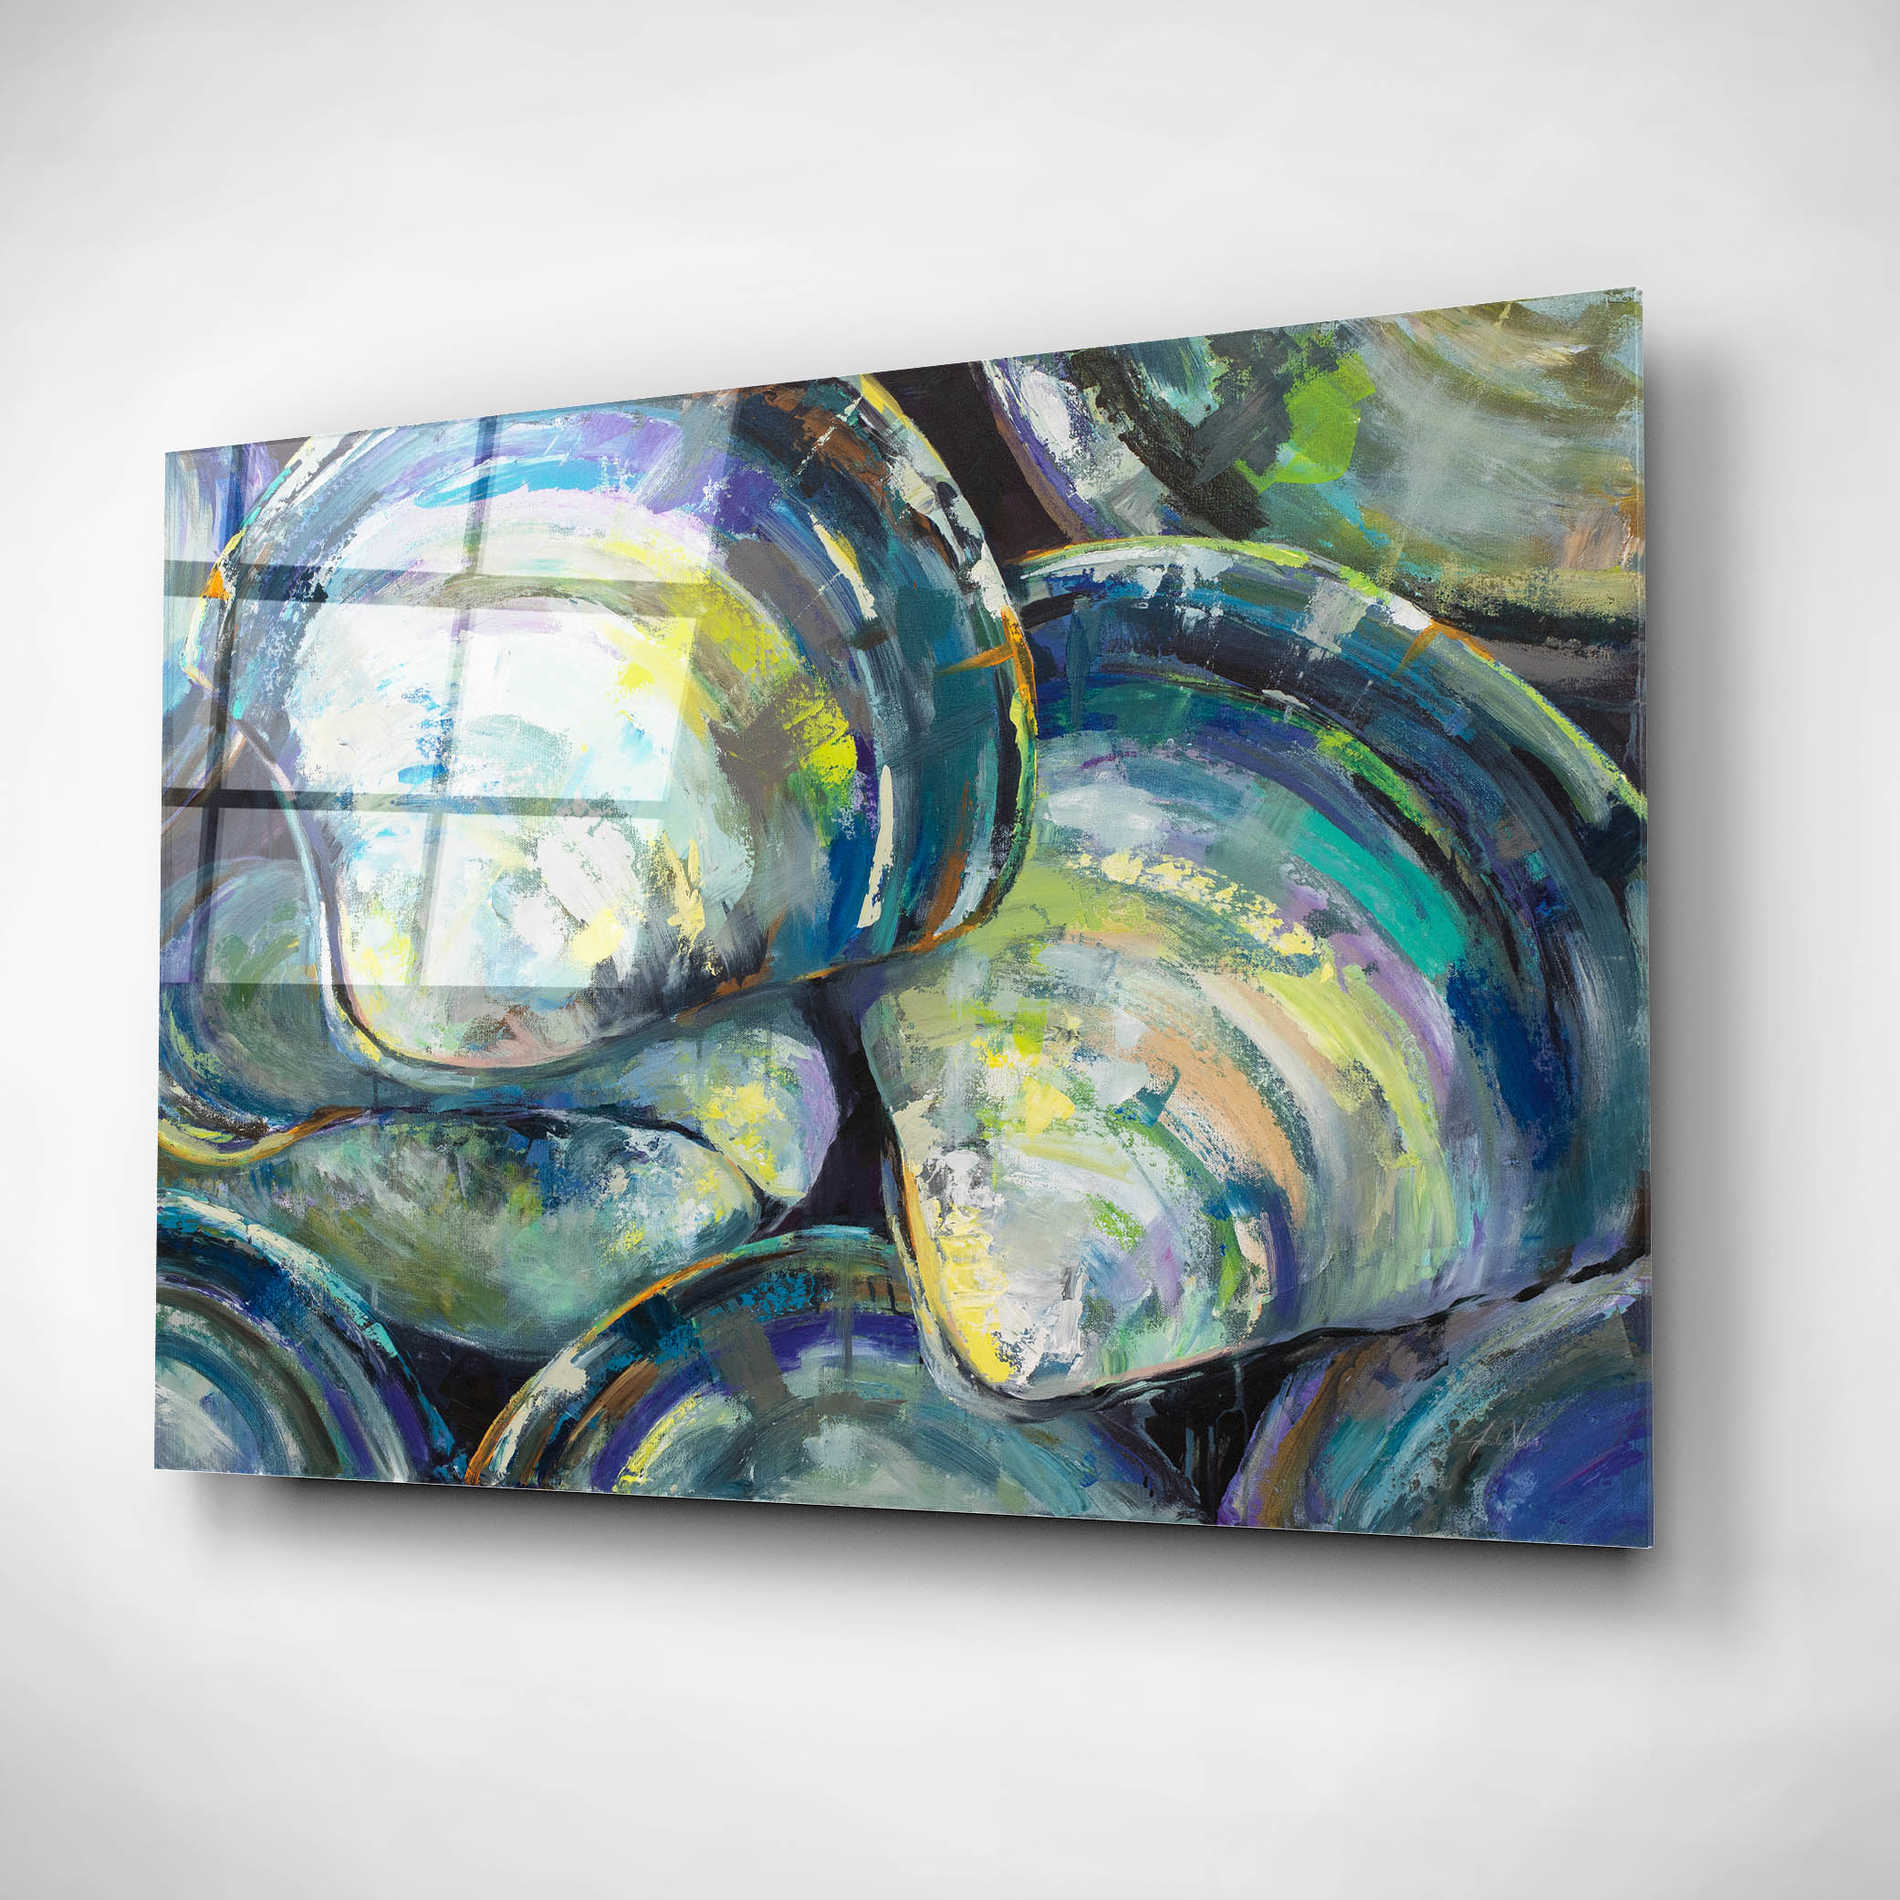 Epic Art 'Variety' by Jeanette Vertentes, Acrylic Glass Wall Art,24x16